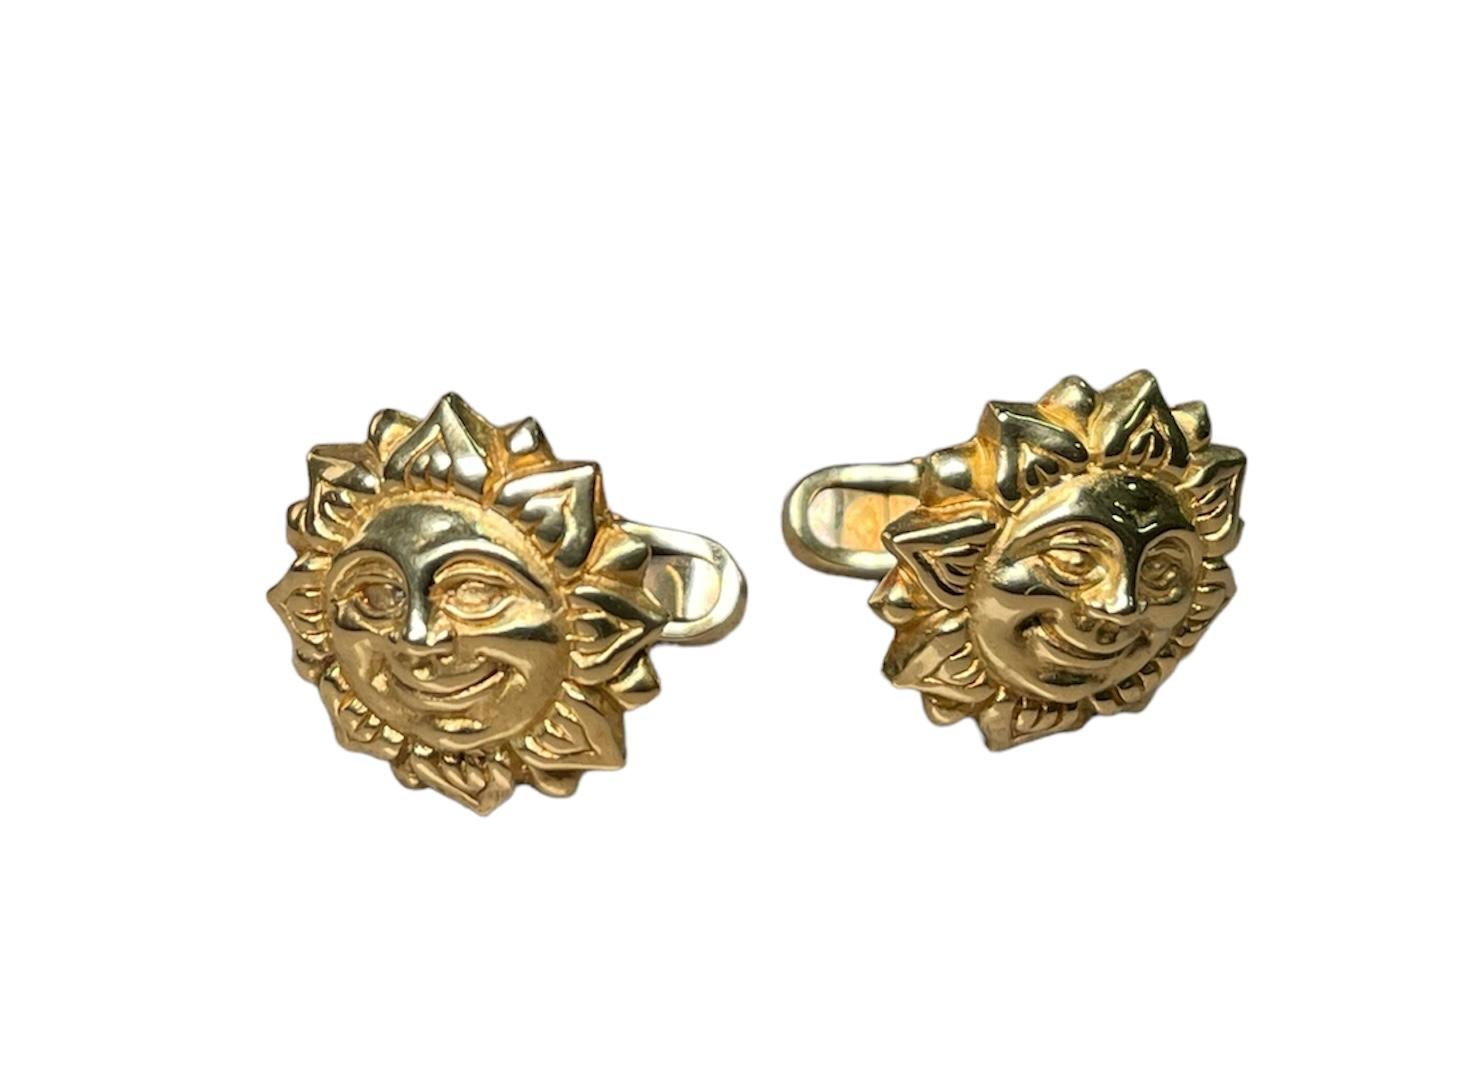 Rare 18k Yellow Gold Pair of Smiling Sun Face Cufflinks For Sale 4